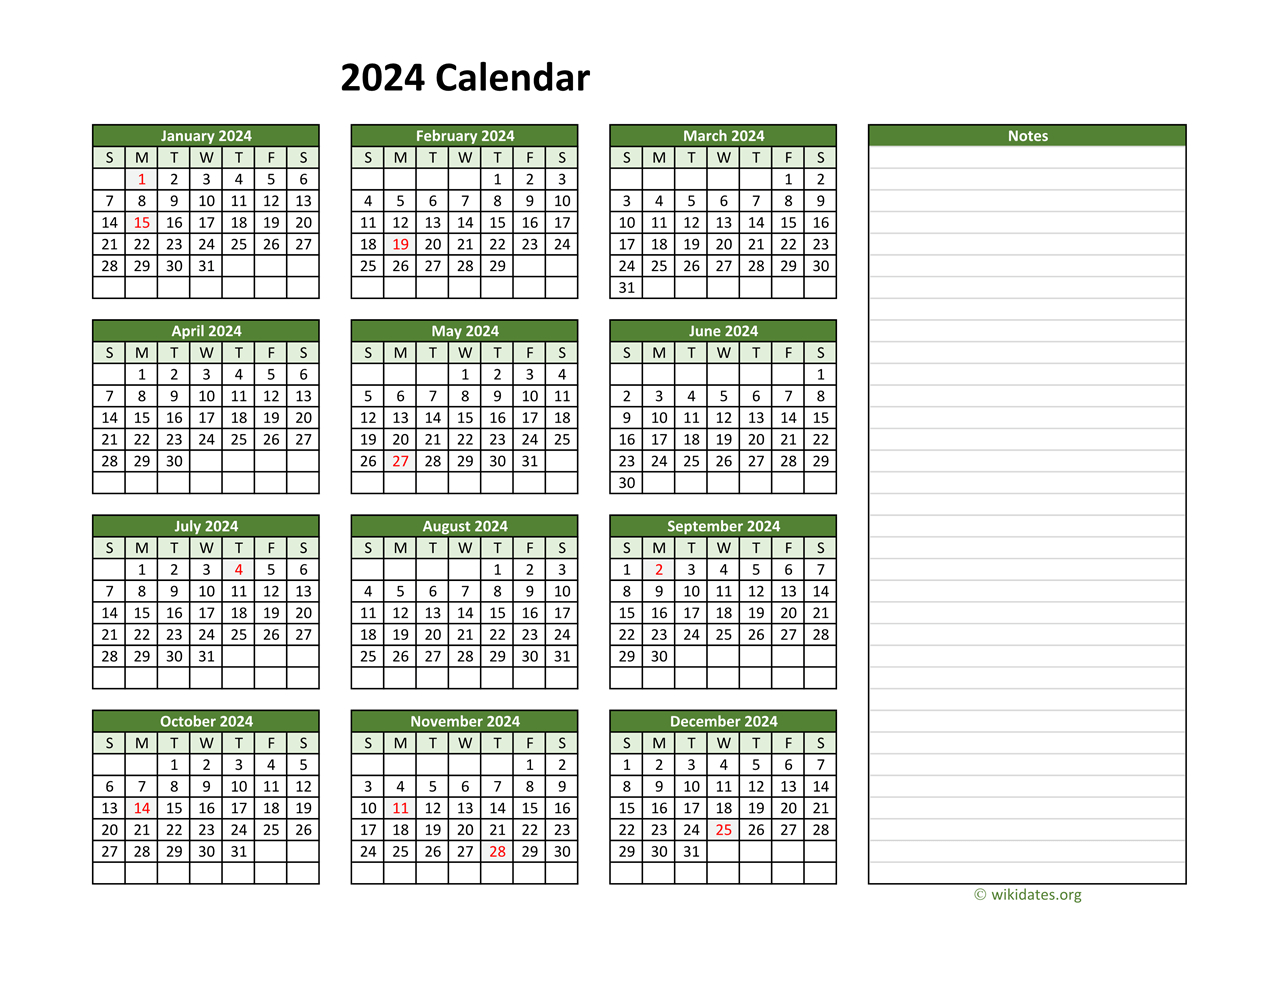 Yearly Printable 2024 Calendar With Notes | Wikidates | Printable Calendar 2024 With Notes